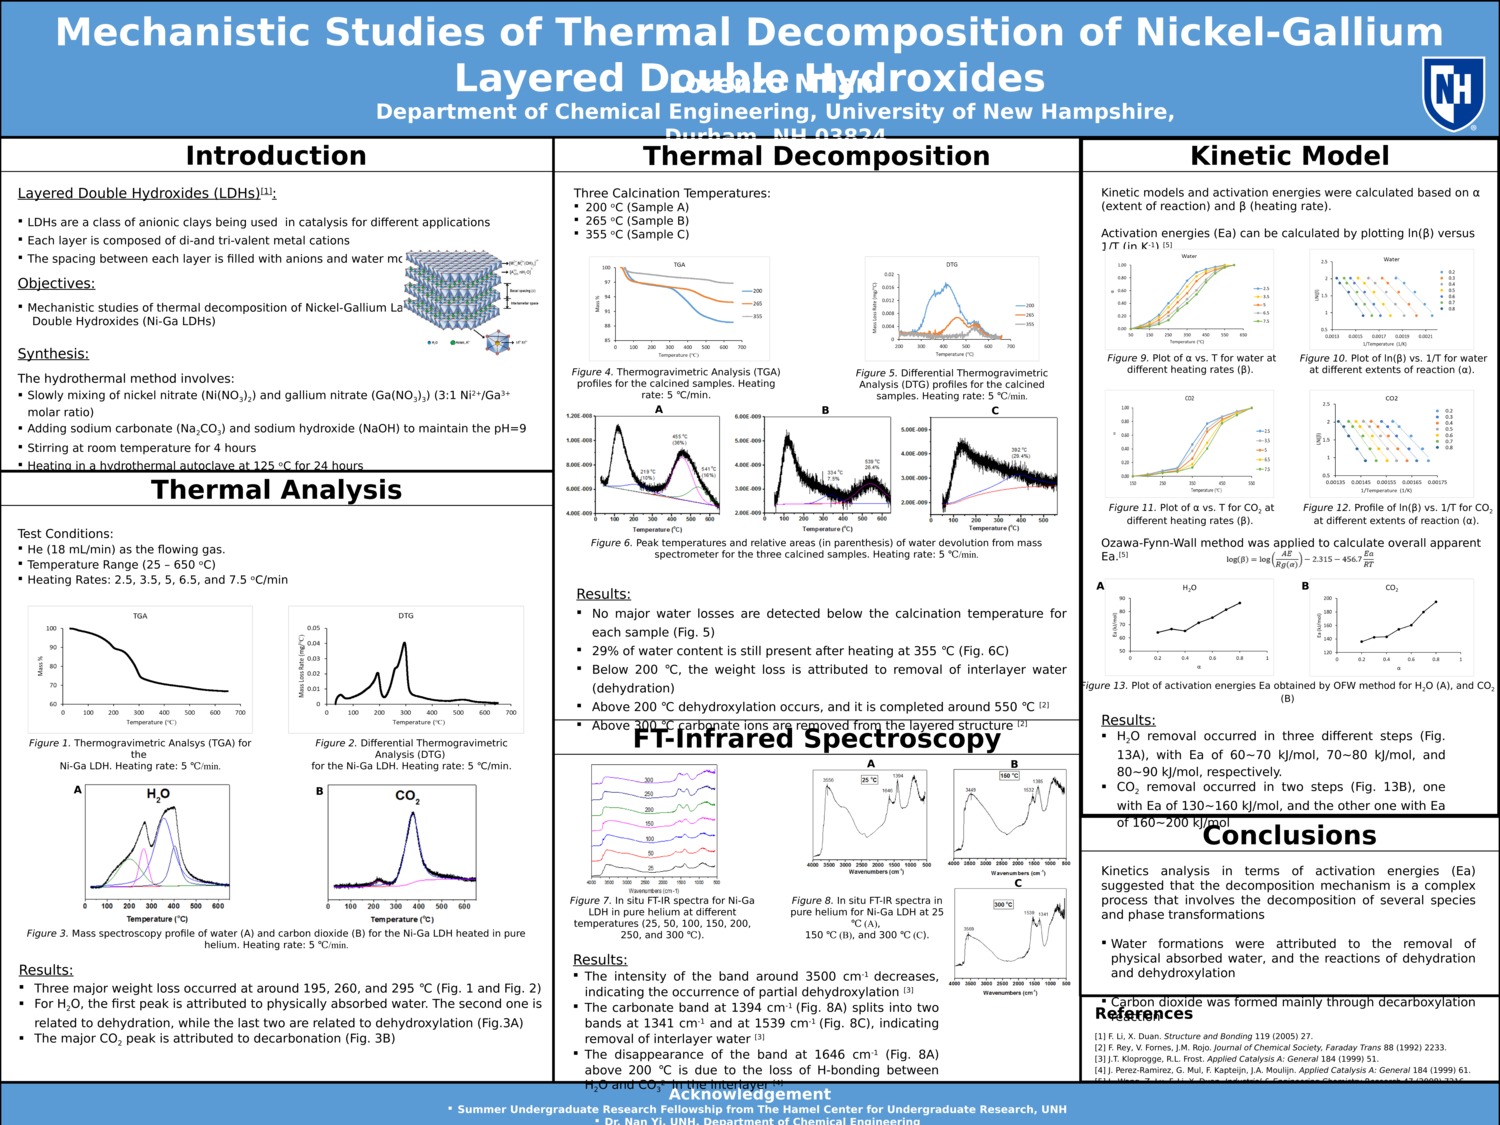 Mechanistic Studies Of Thermal Decomposition Of Nickel-Gallium Layered Double Hydroxides by lm2014